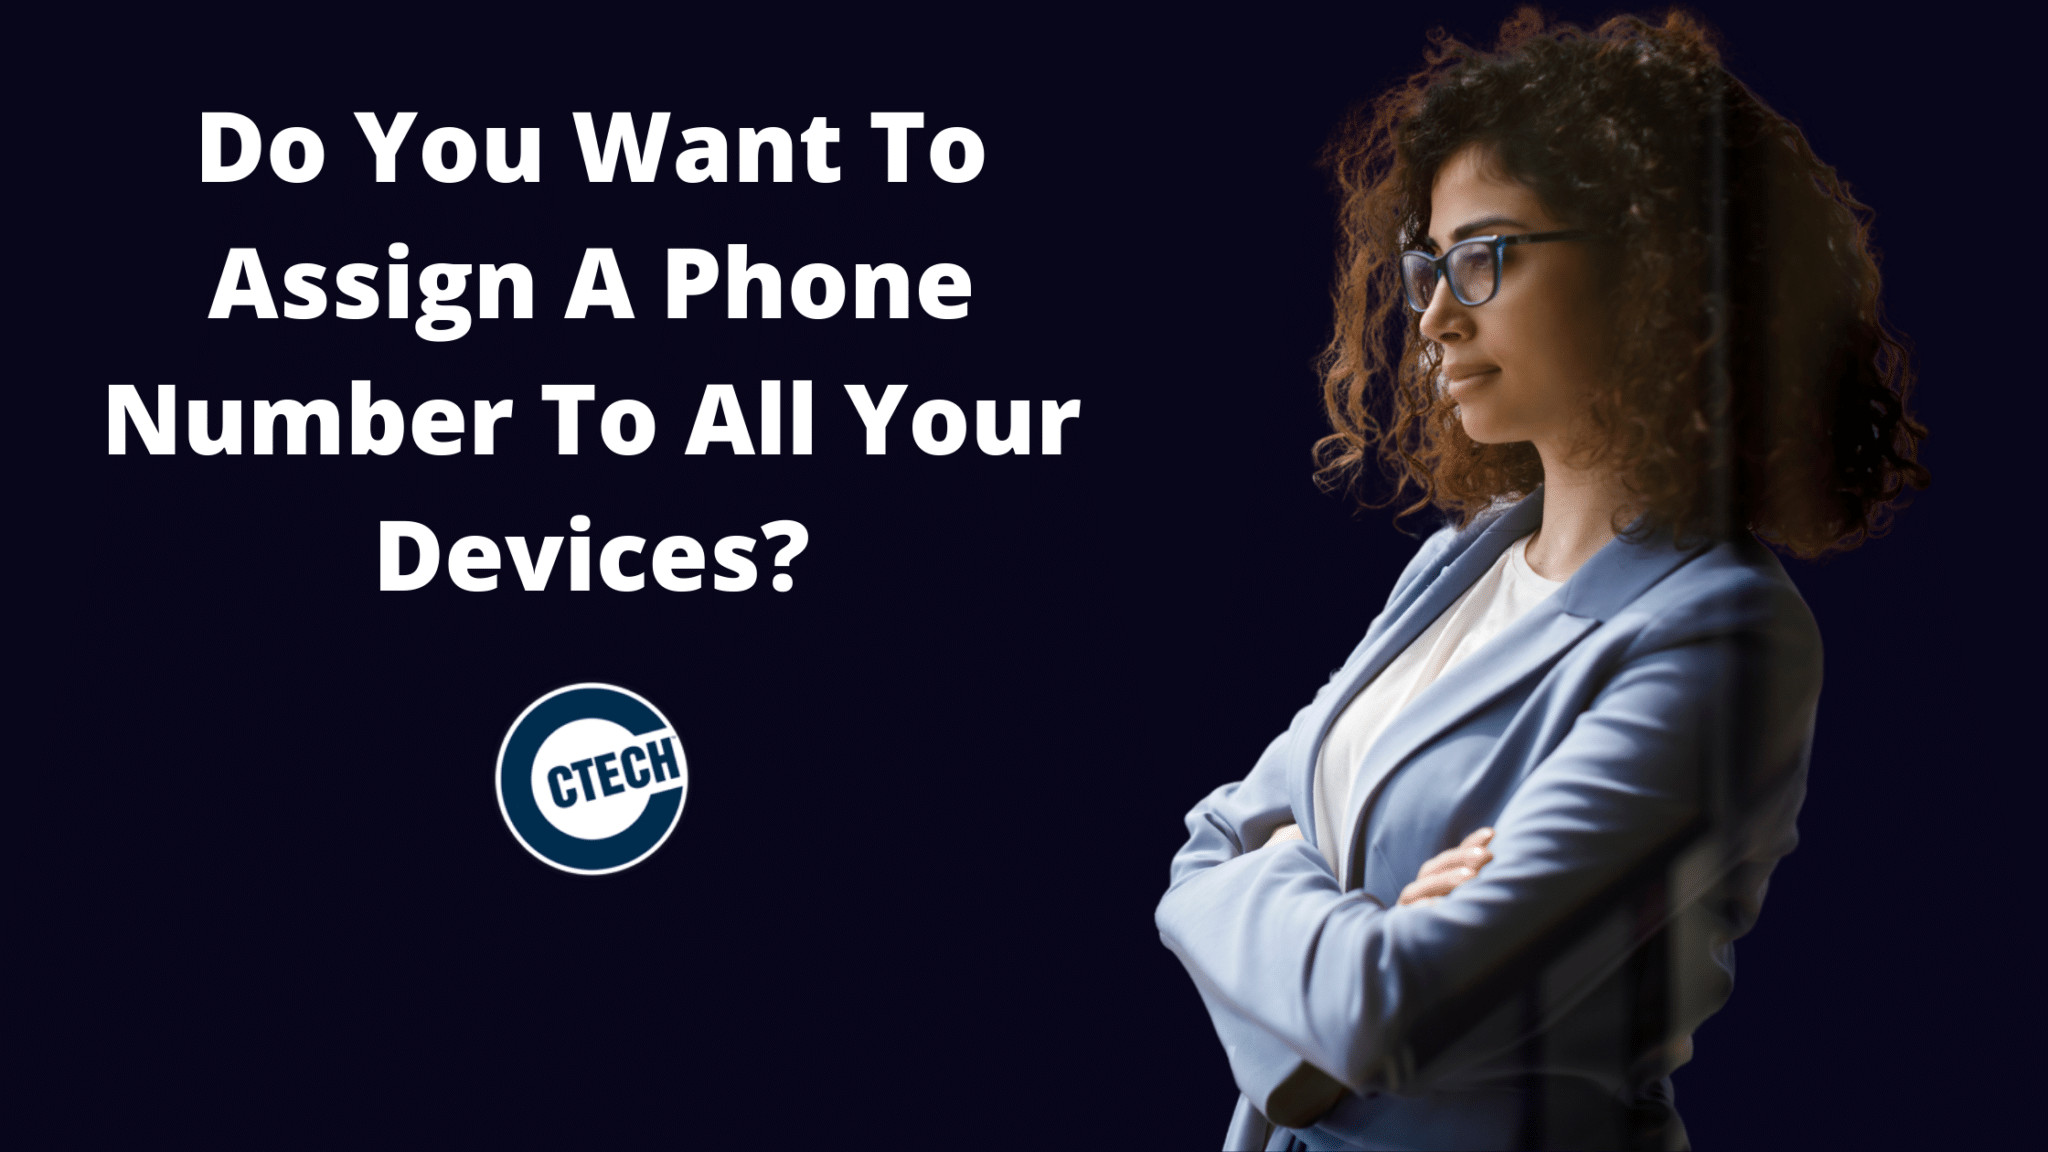 Do You Want To Assign A Phone Number To All Your Devices?